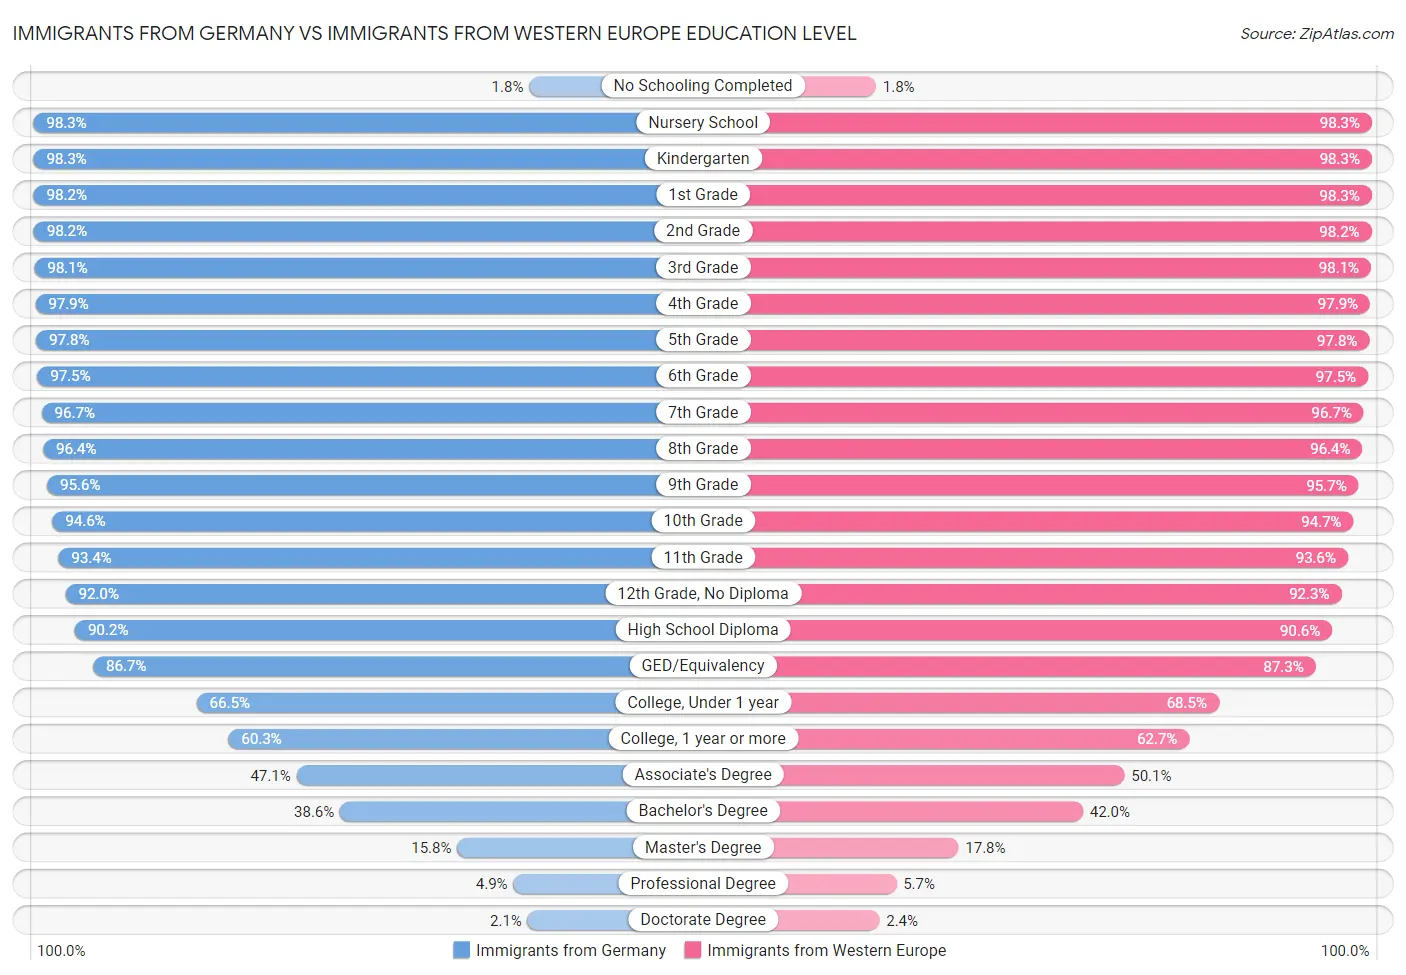 Immigrants from Germany vs Immigrants from Western Europe Education Level